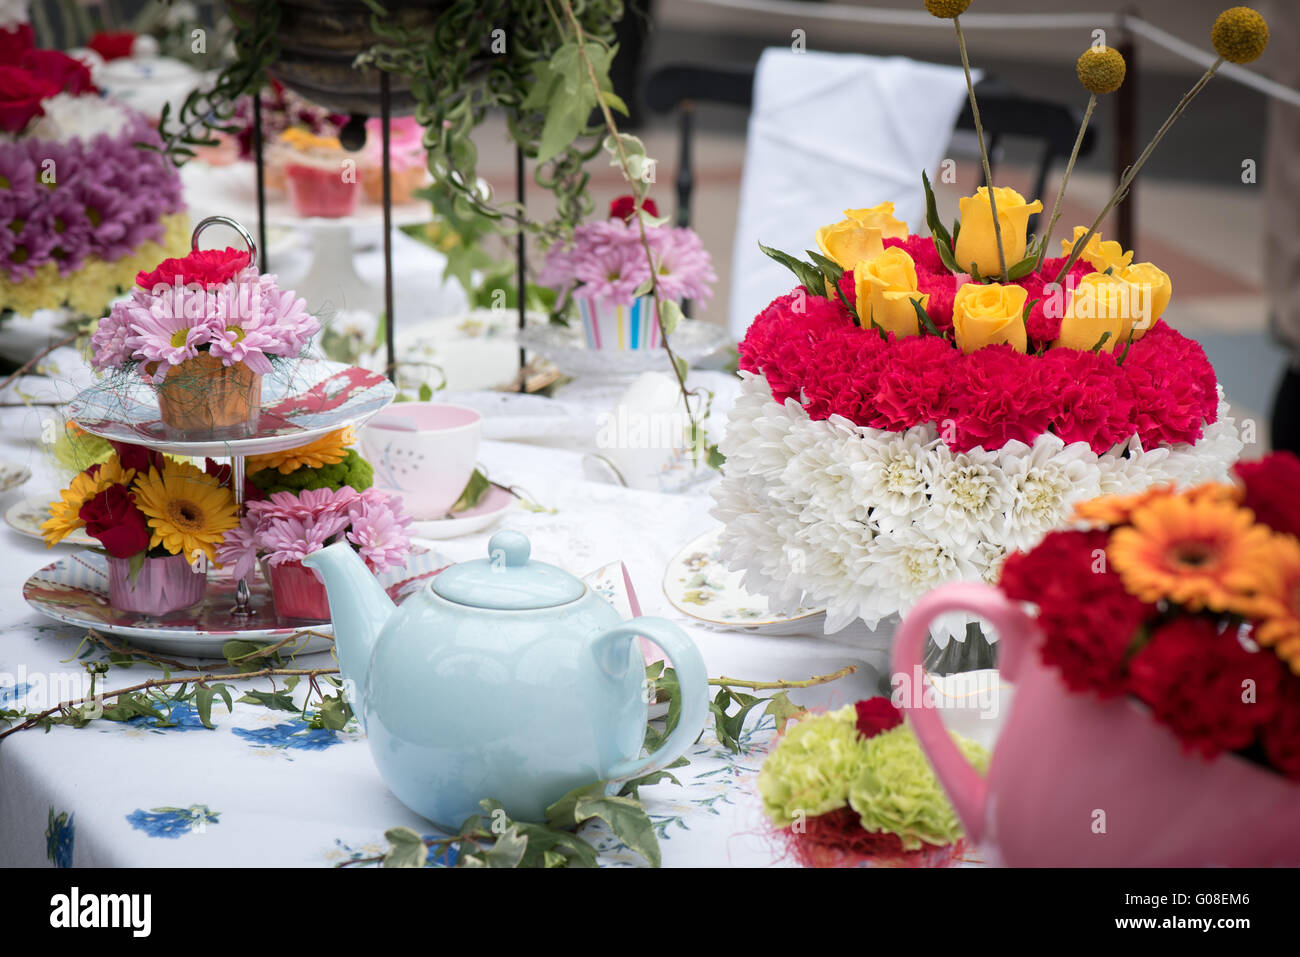 Afternoon tea Mad Hatter style at Cake International – The Sugarcraft, Cake Decorating and Baking Show in London Stock Photo